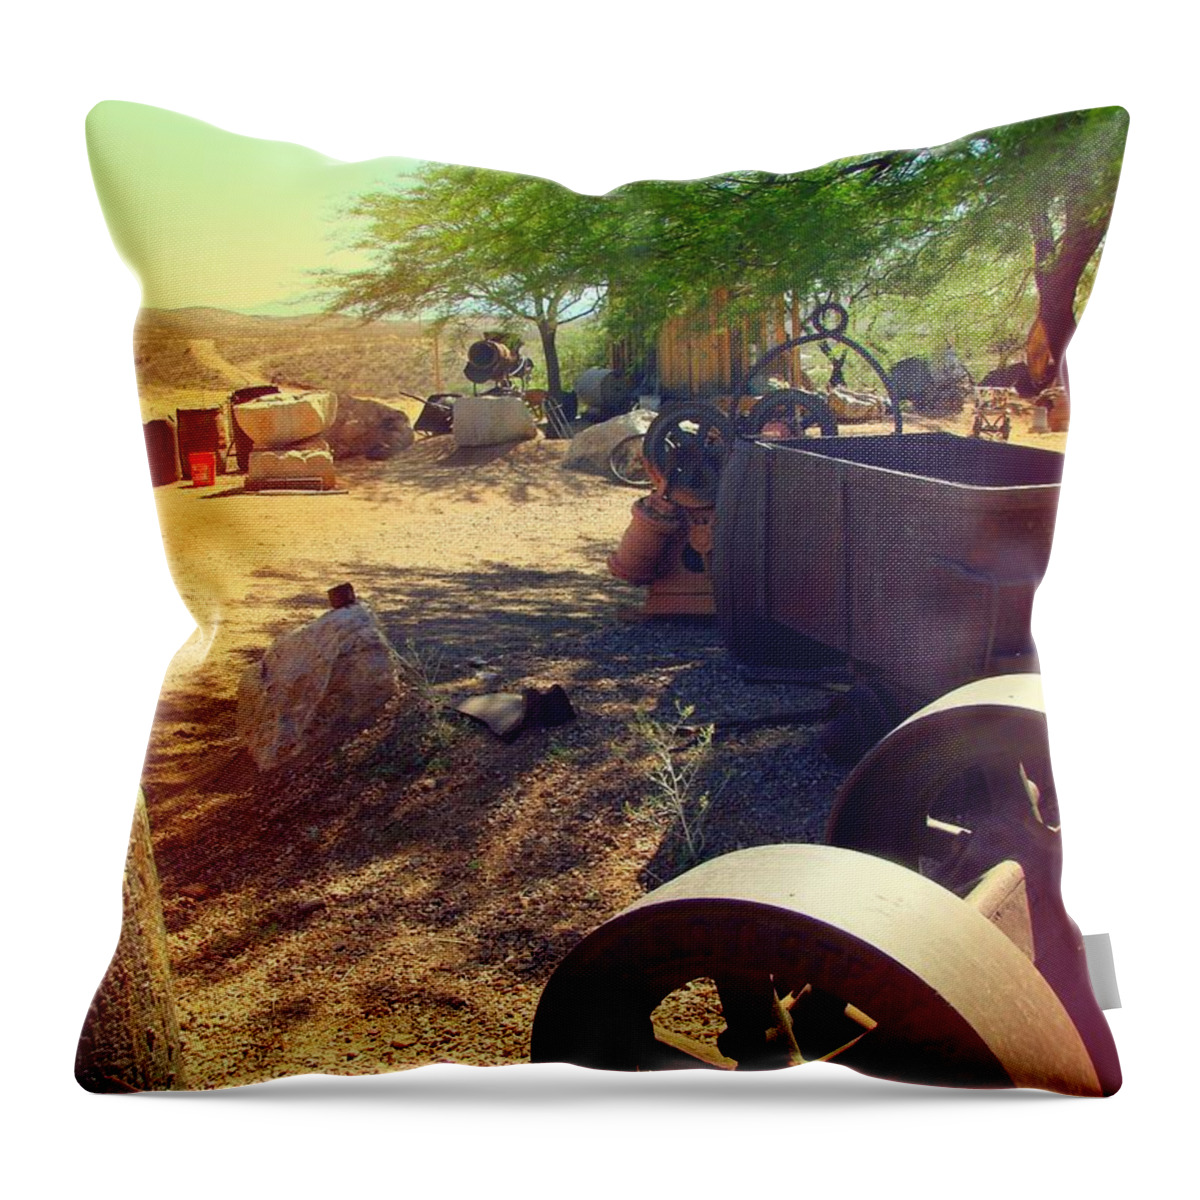 Silver Mines Throw Pillow featuring the digital art Tombstone Miner's Yard by Carol Oufnac Mahan